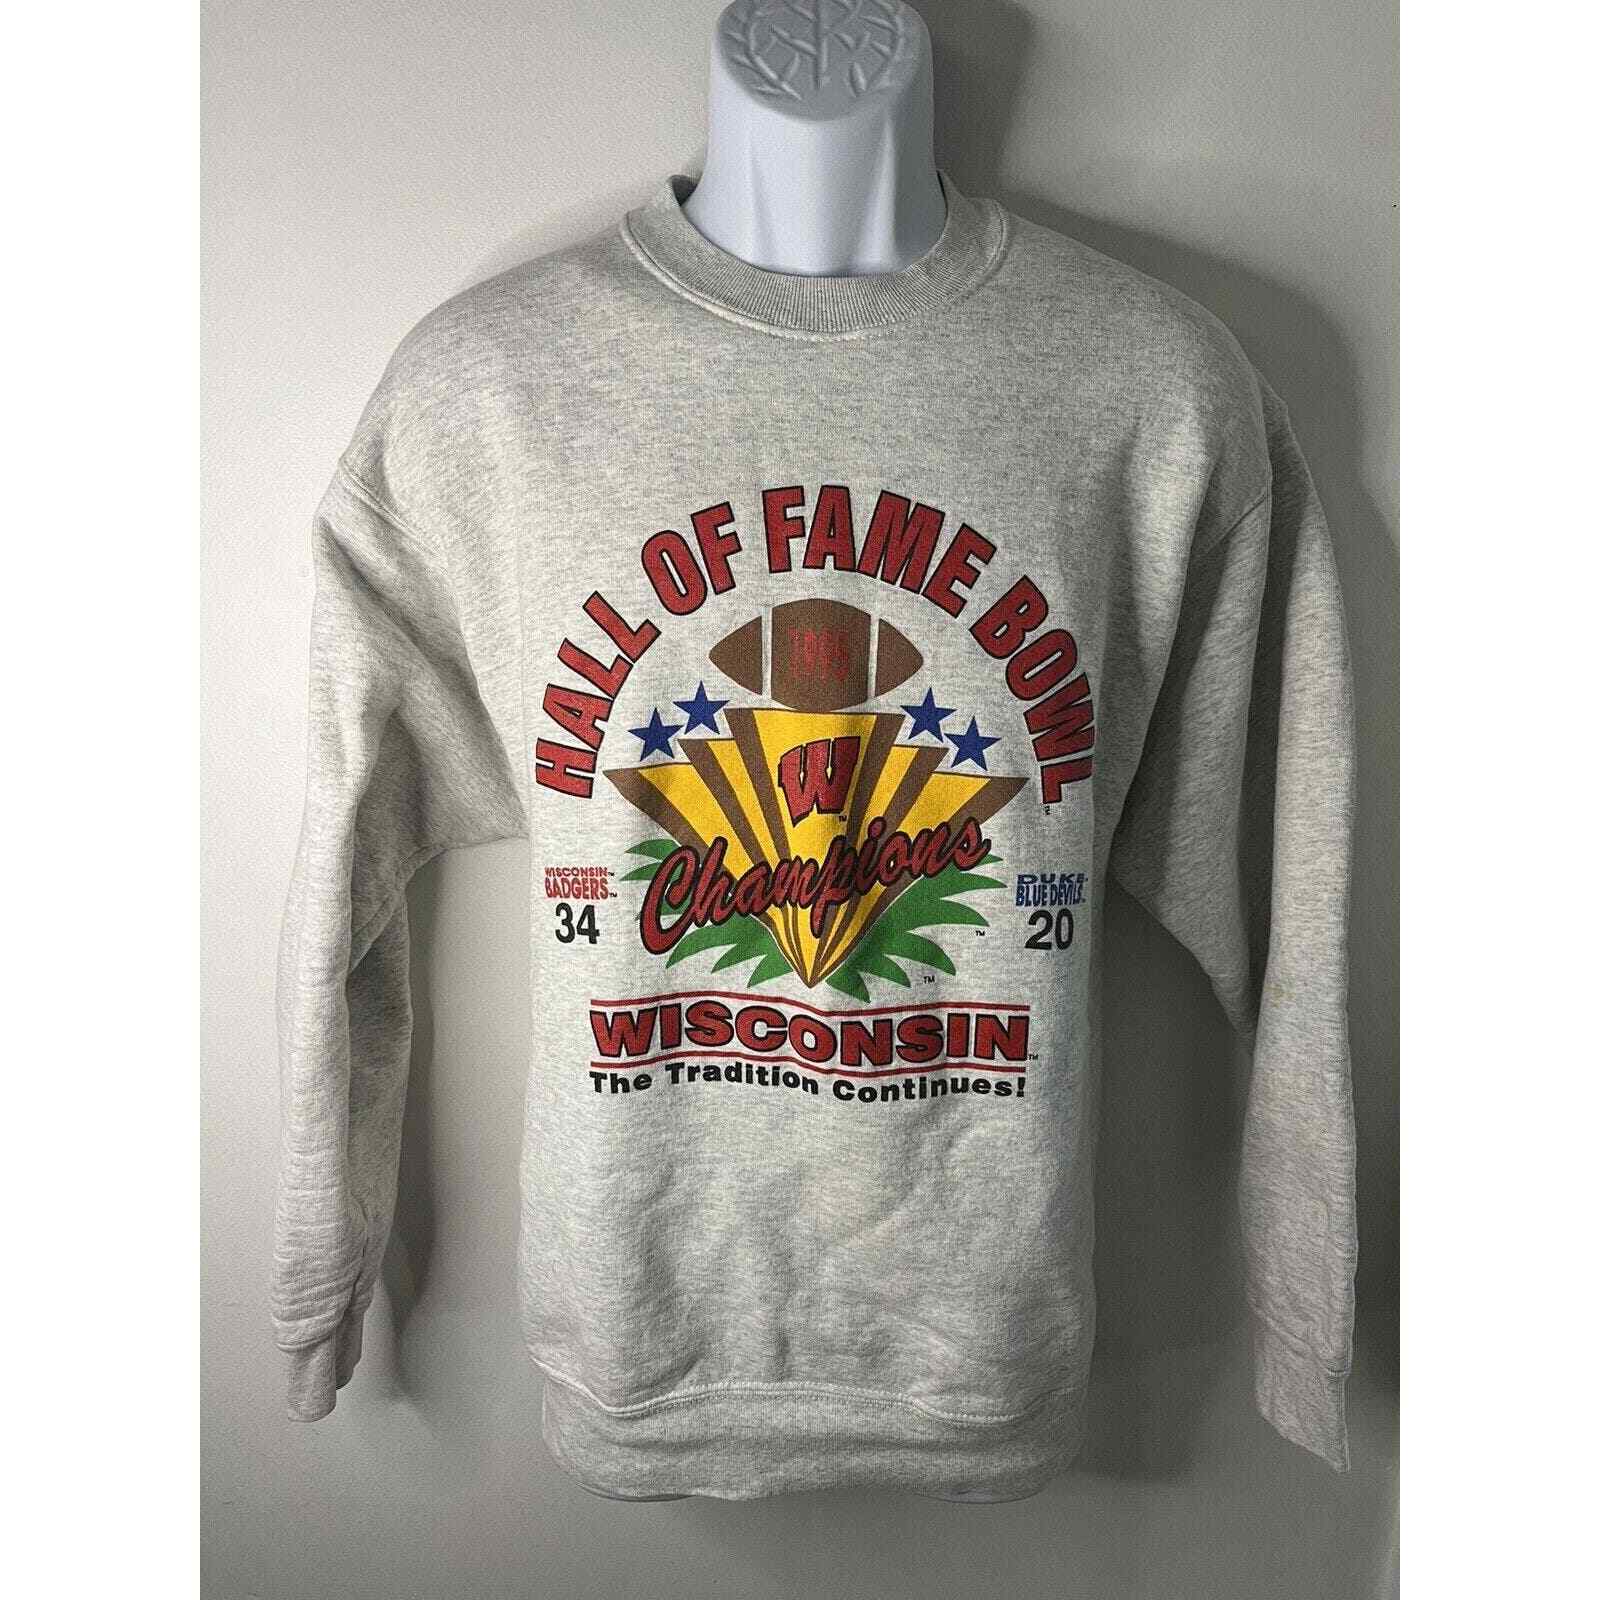 Vintage Wisconsin Badgers 1995 Football Large Fruit Of The Loom Crewneck Sweater